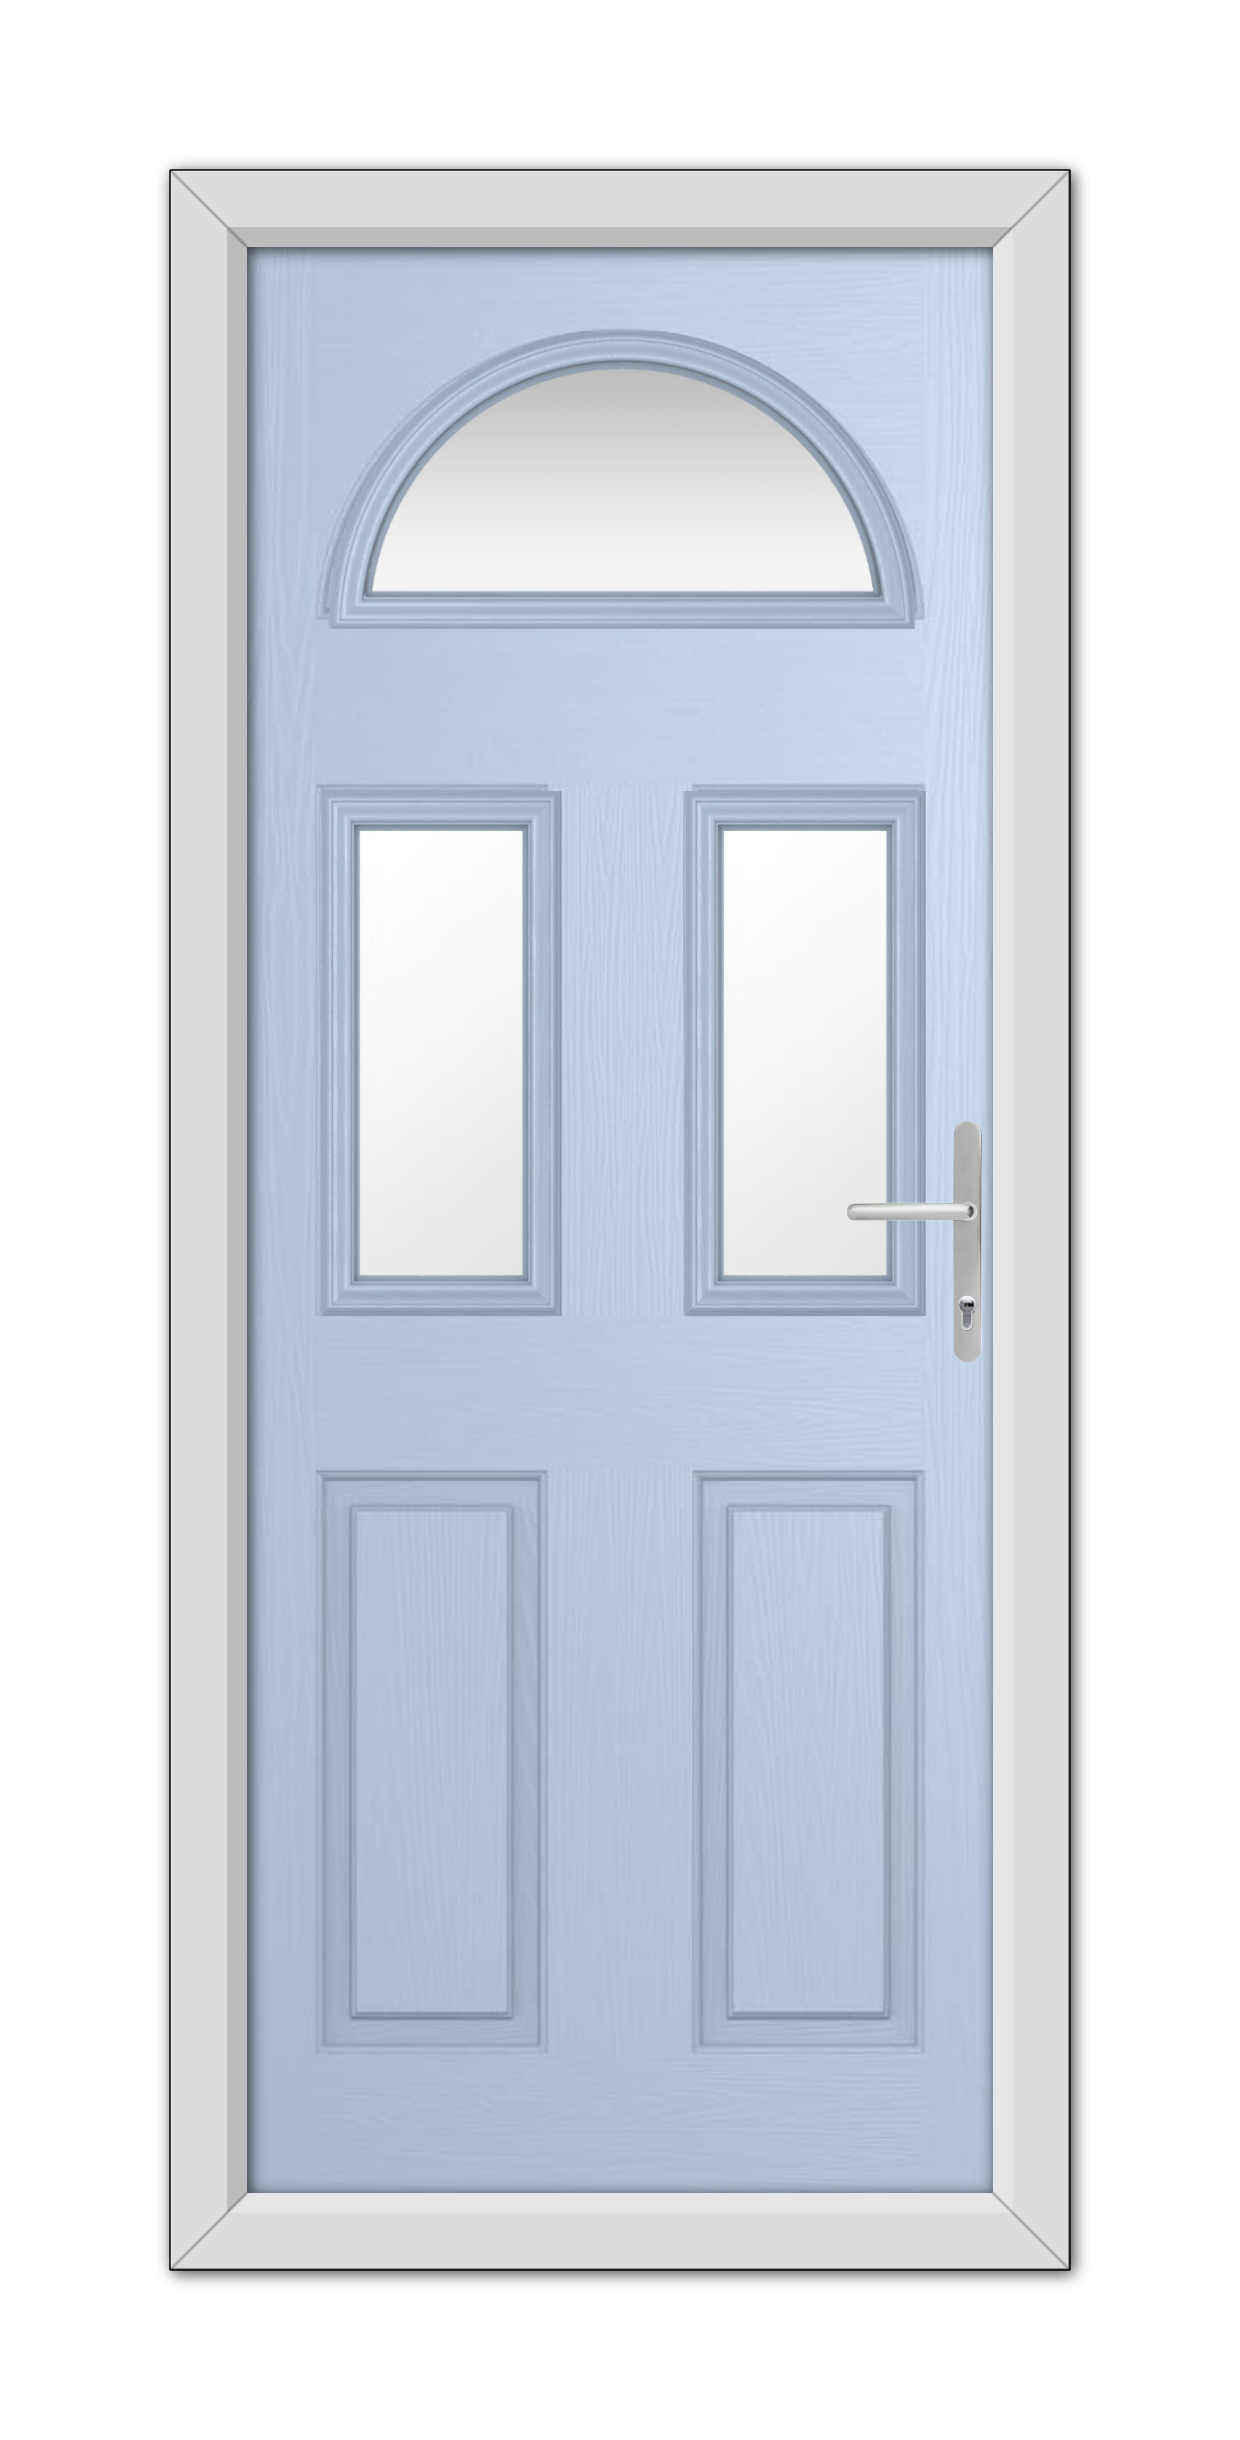 Duck Egg Blue Winslow 3 Composite Door with an arched window at the top, four recessed panels, and a modern handle, set within a white frame.